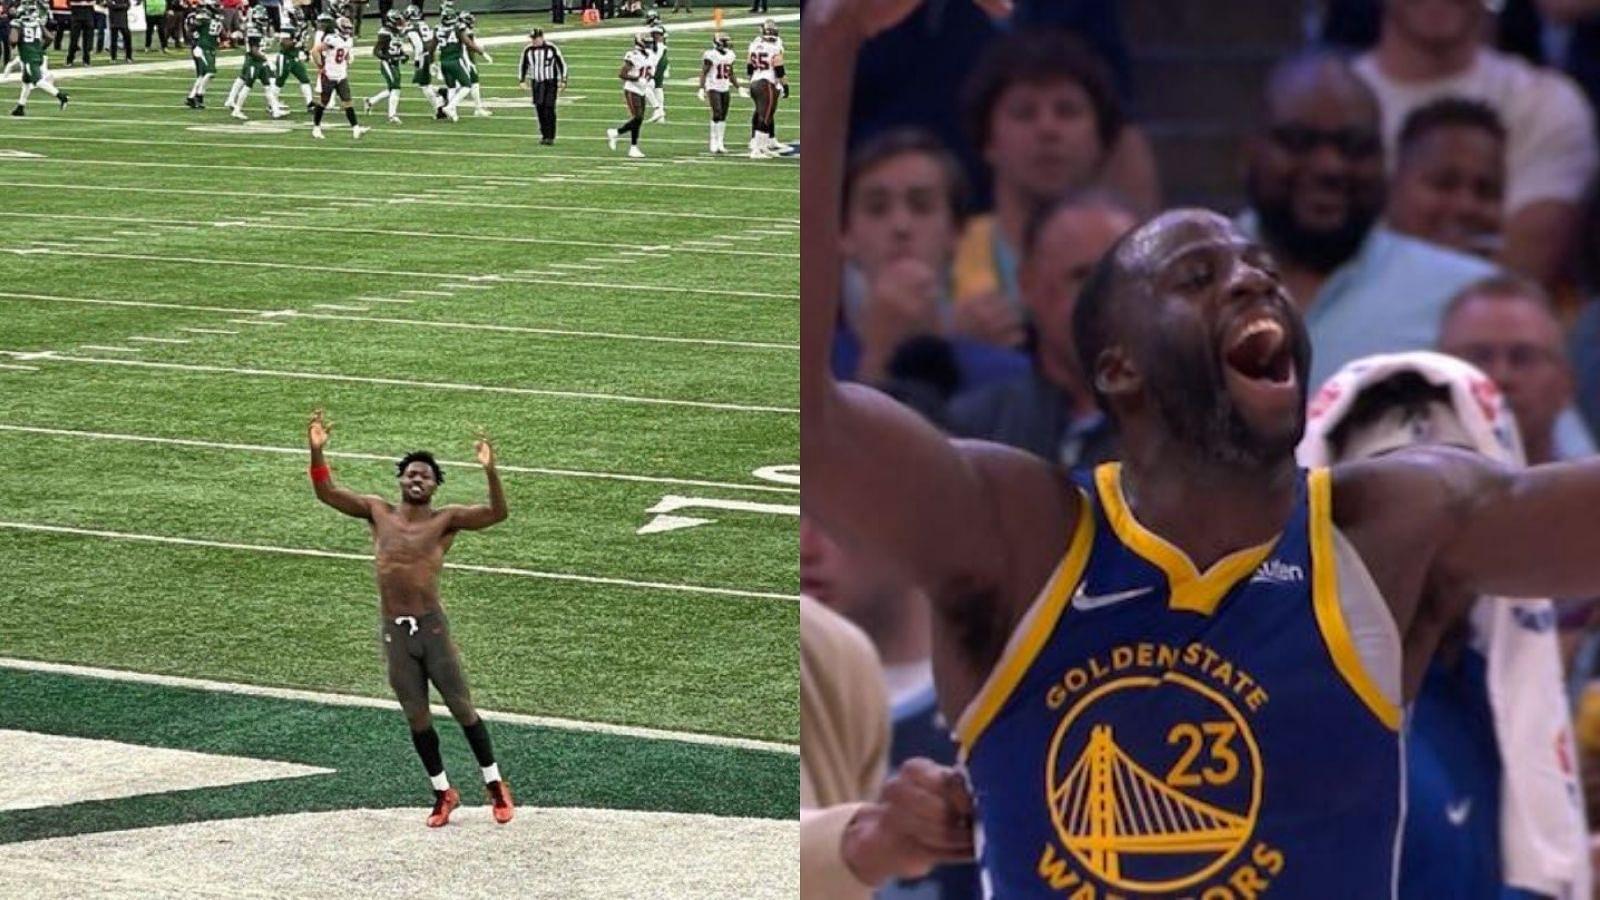 "He’s celebrating getting thrown out? Is it Draymond Green or Antonio Brown": NBA fans and players have mixed reactions to Warriors forward's unjust ejection against Grizzlies